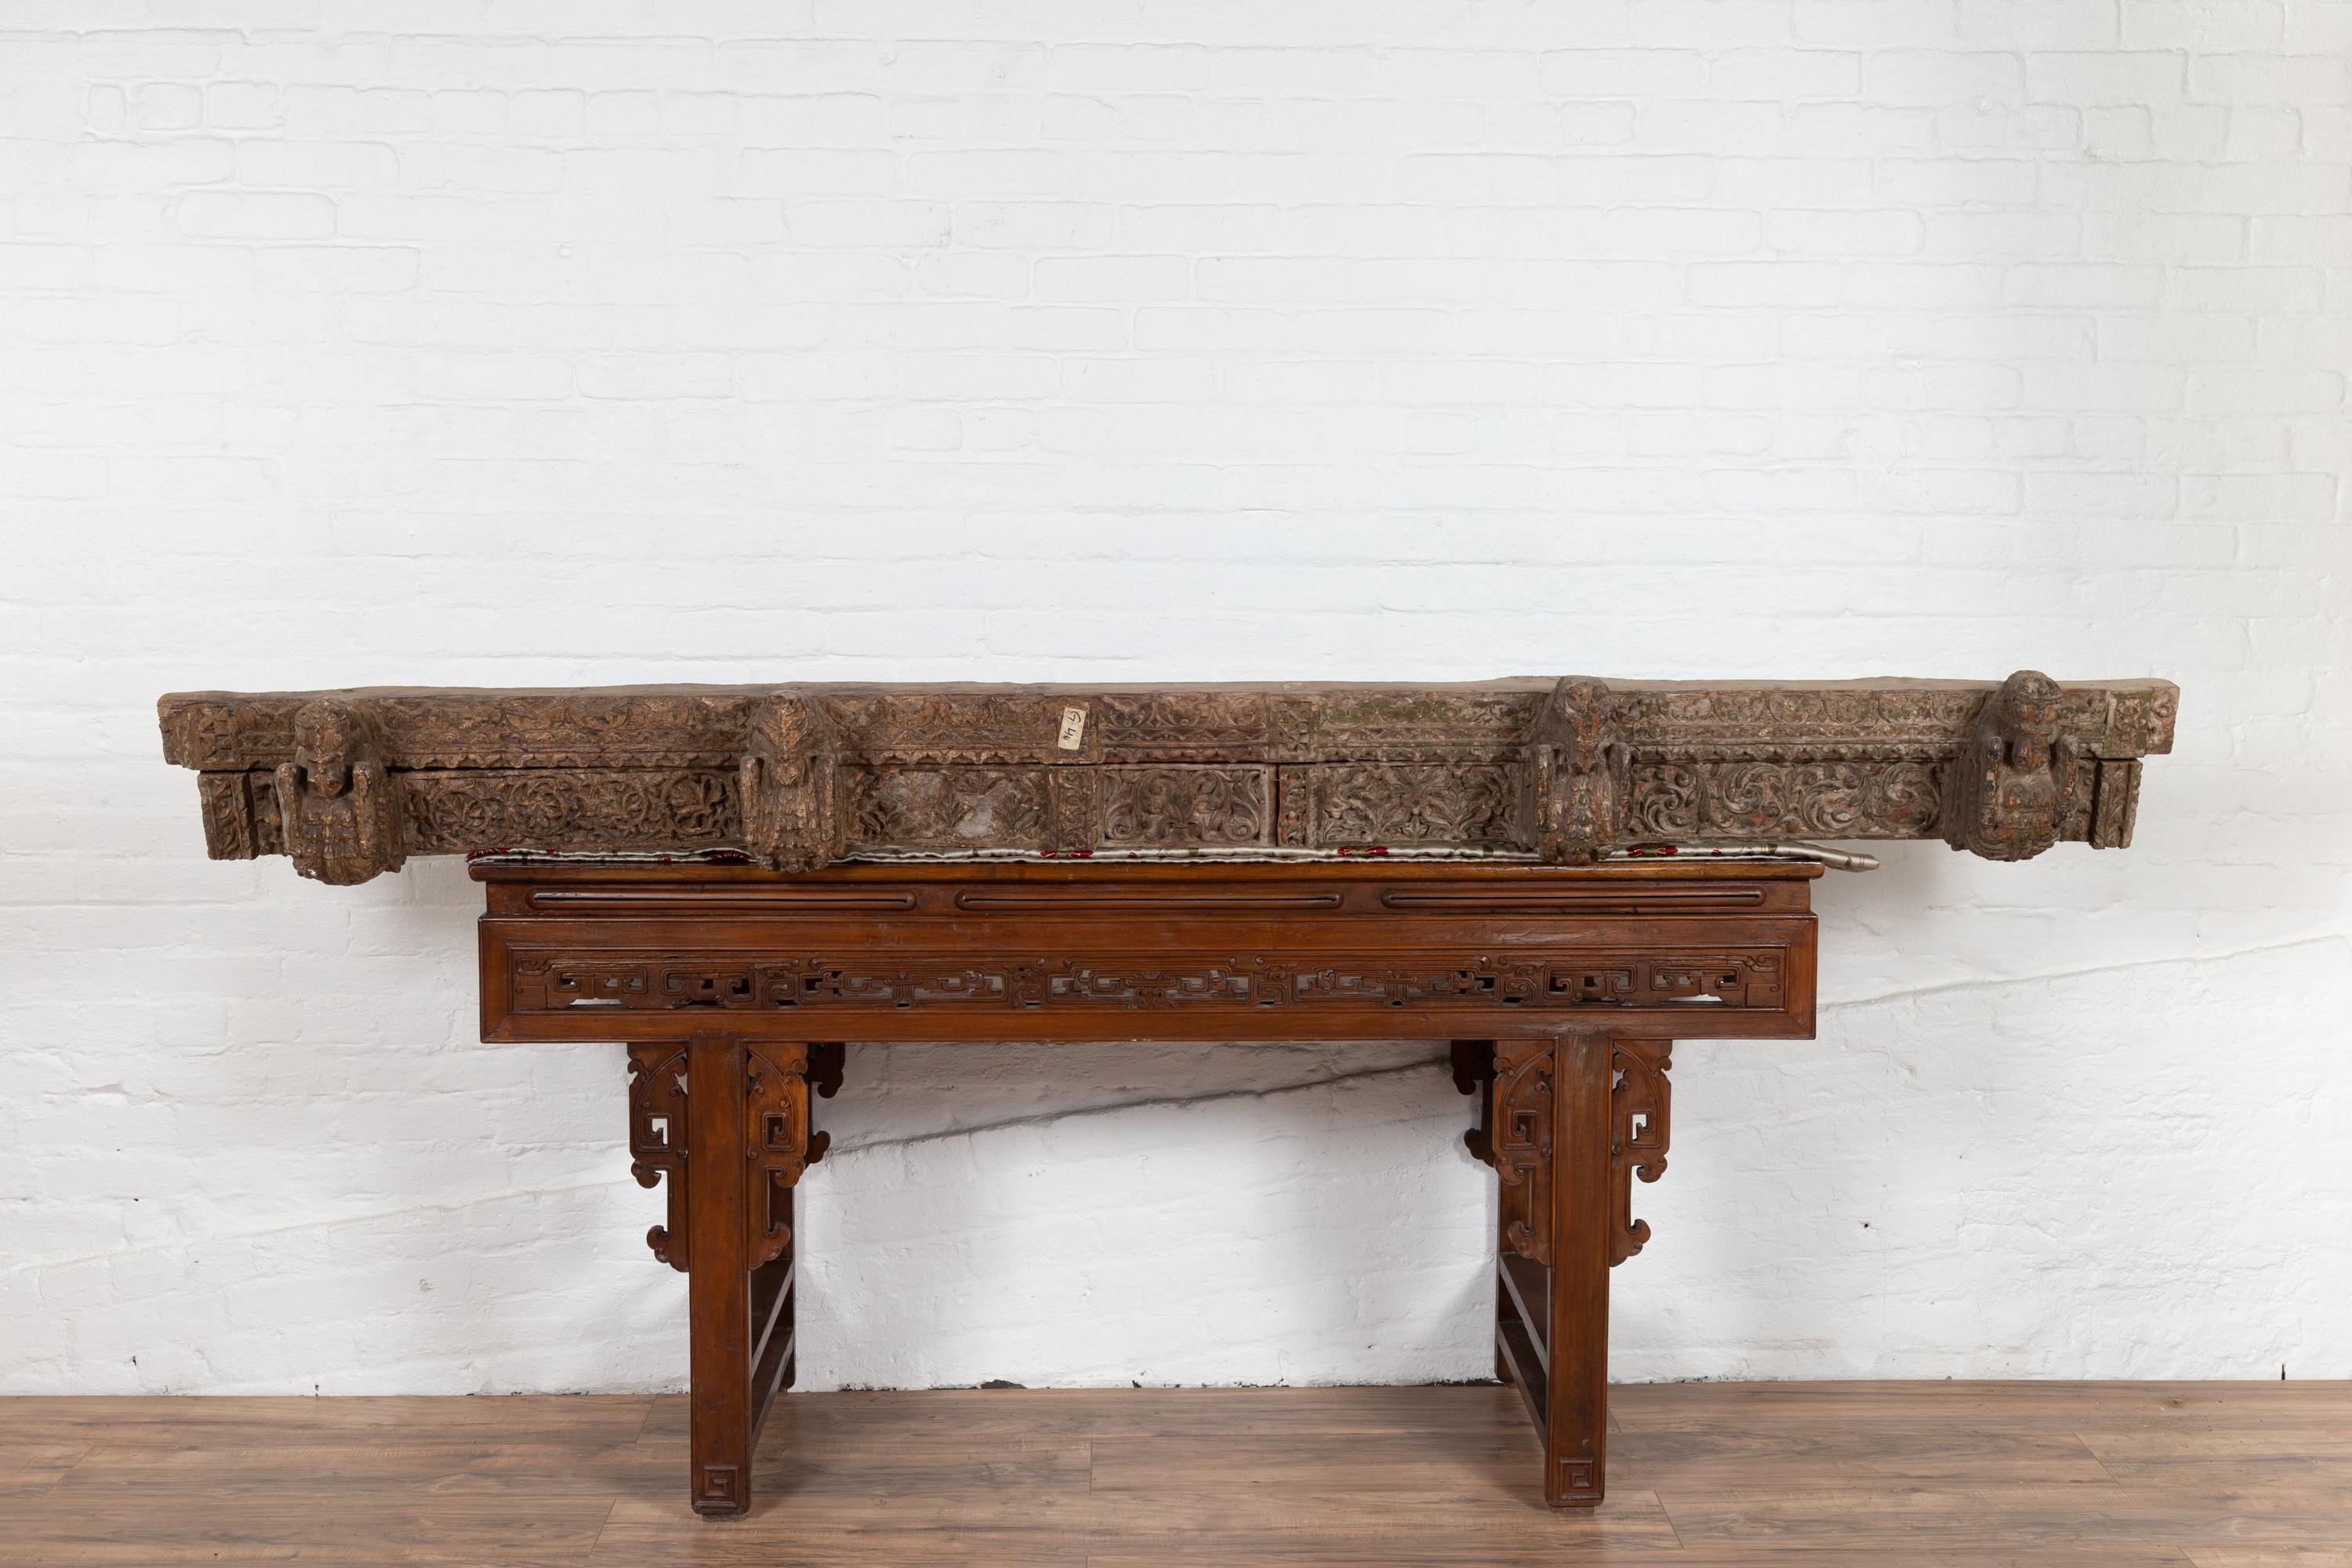 An antique 19th century architectural molding from an Indian temple with carved animals and foliage. Born in India during the 19th century, this horizontal cornice features carved protruding animals standing out beautifully on foliage adorned